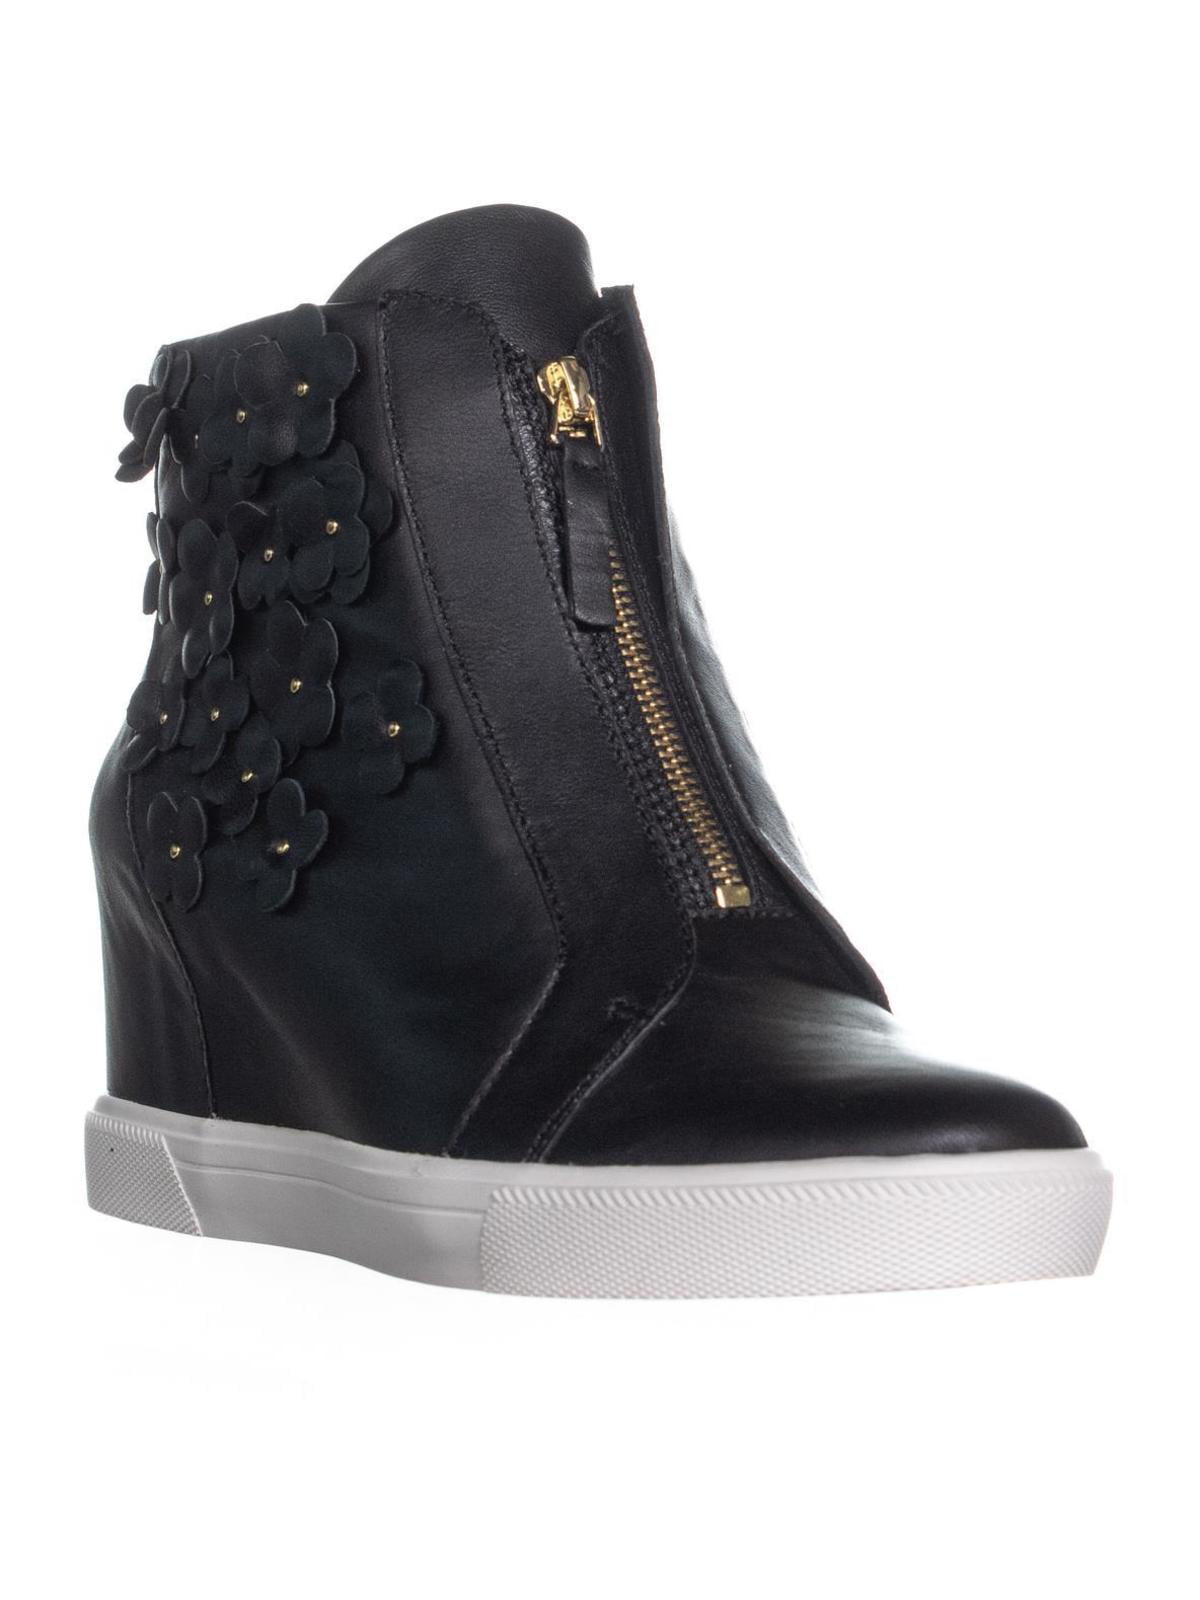 DKNY - Womens DKNY Connie Wedge Sneaker Center Zip Pull On Sneakers ...